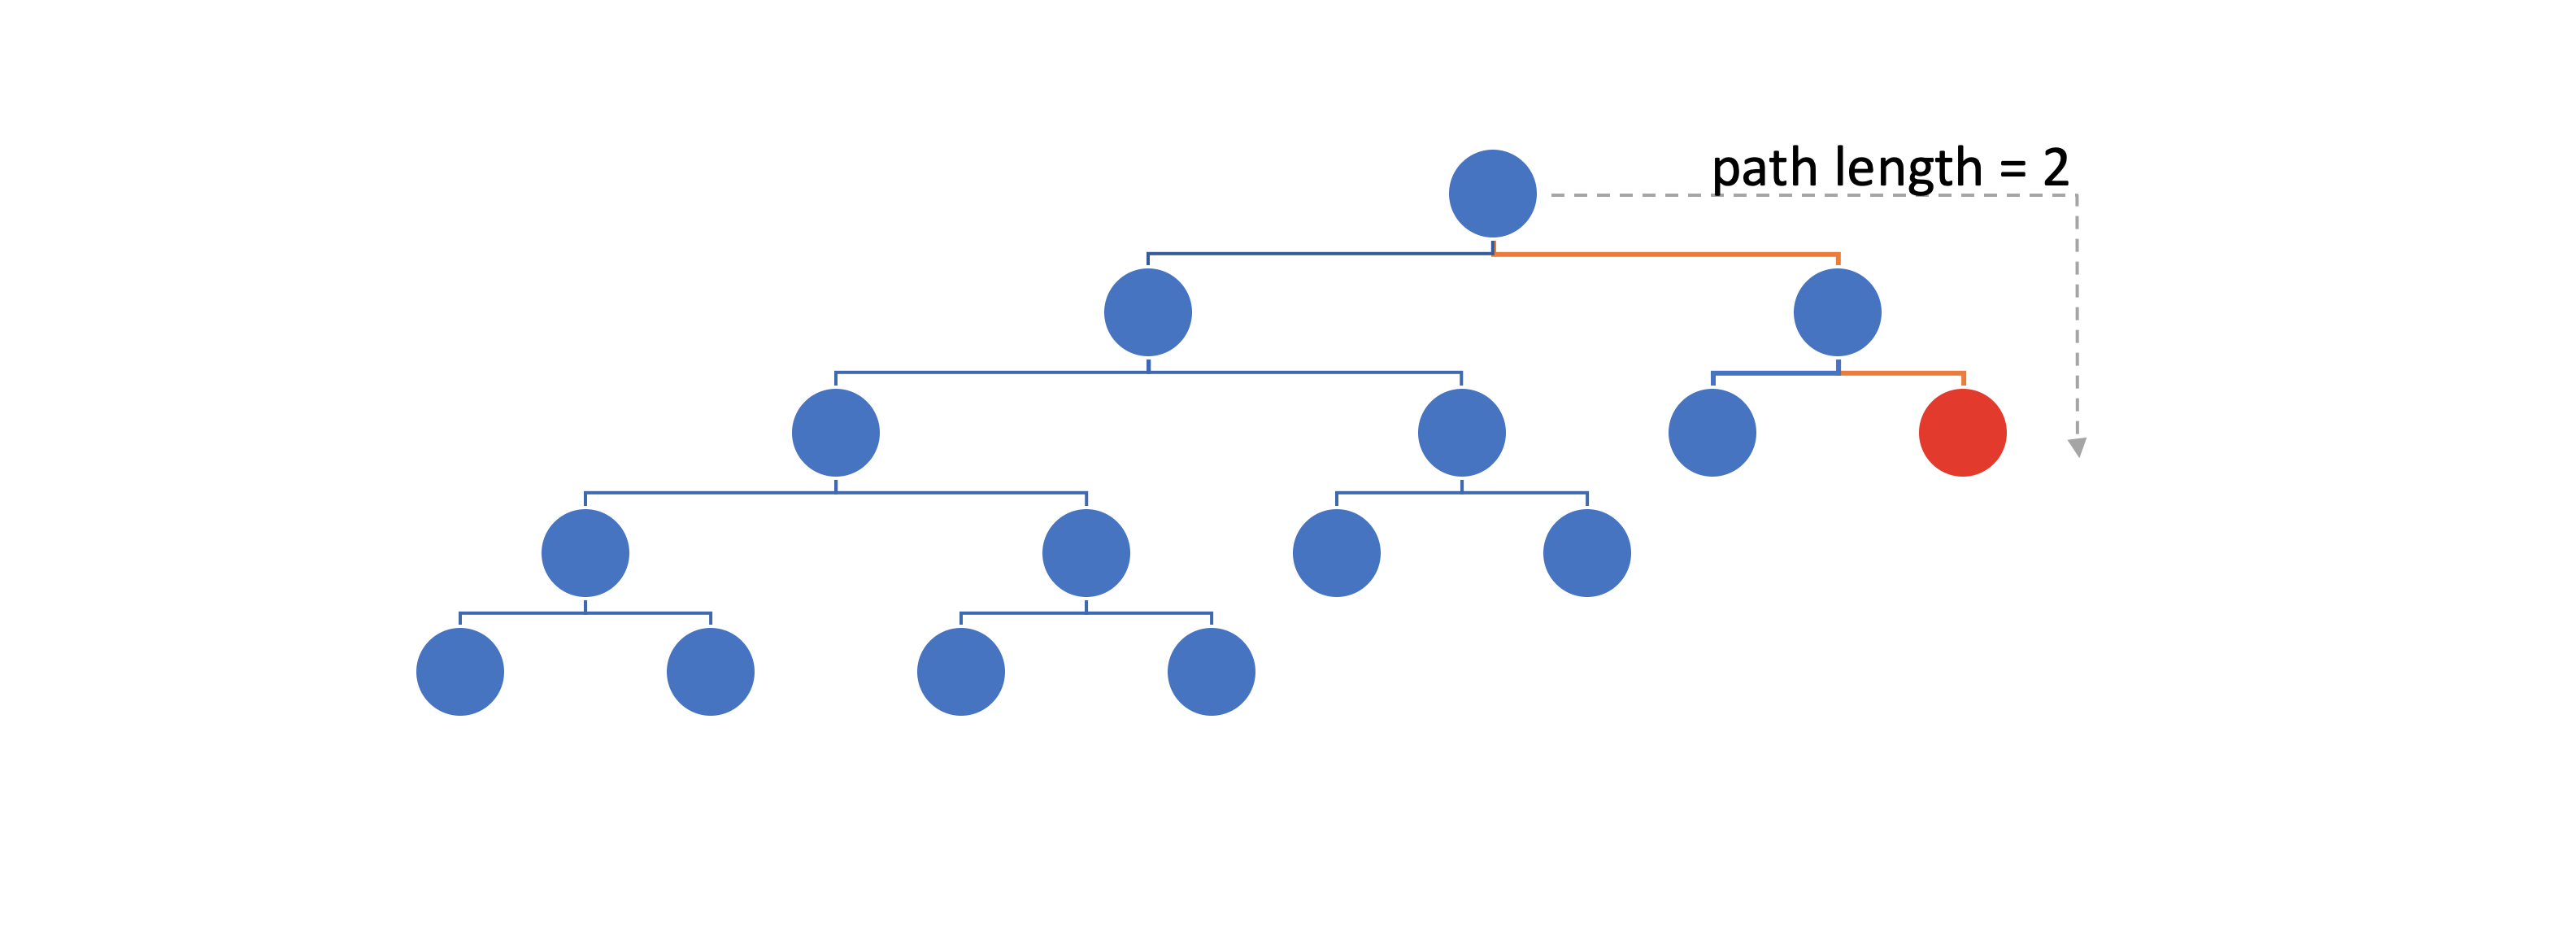 Example of a path length calculation